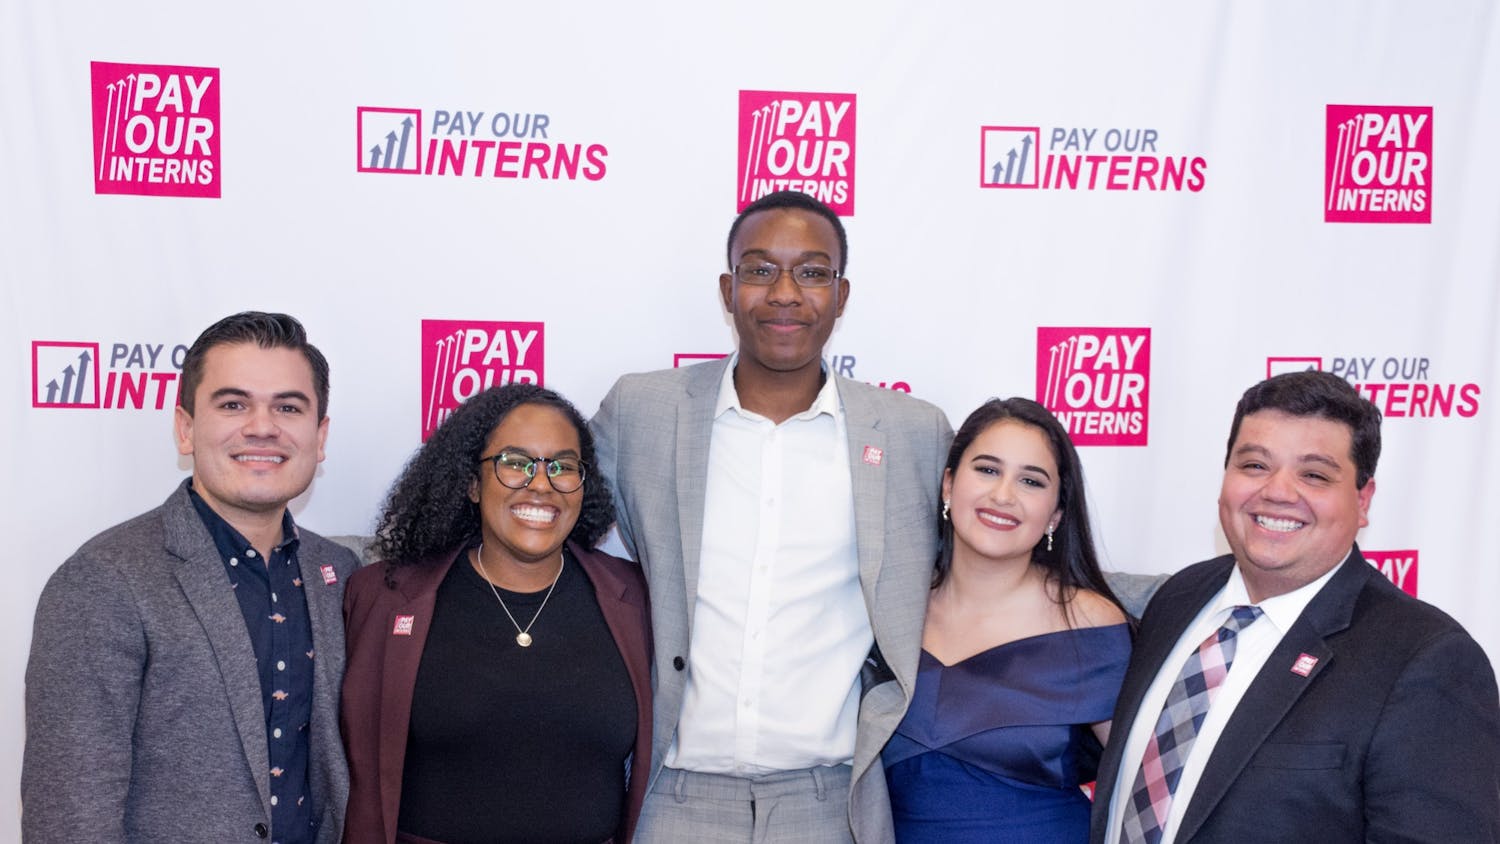 Photo of "Pay Our Interns".jpg